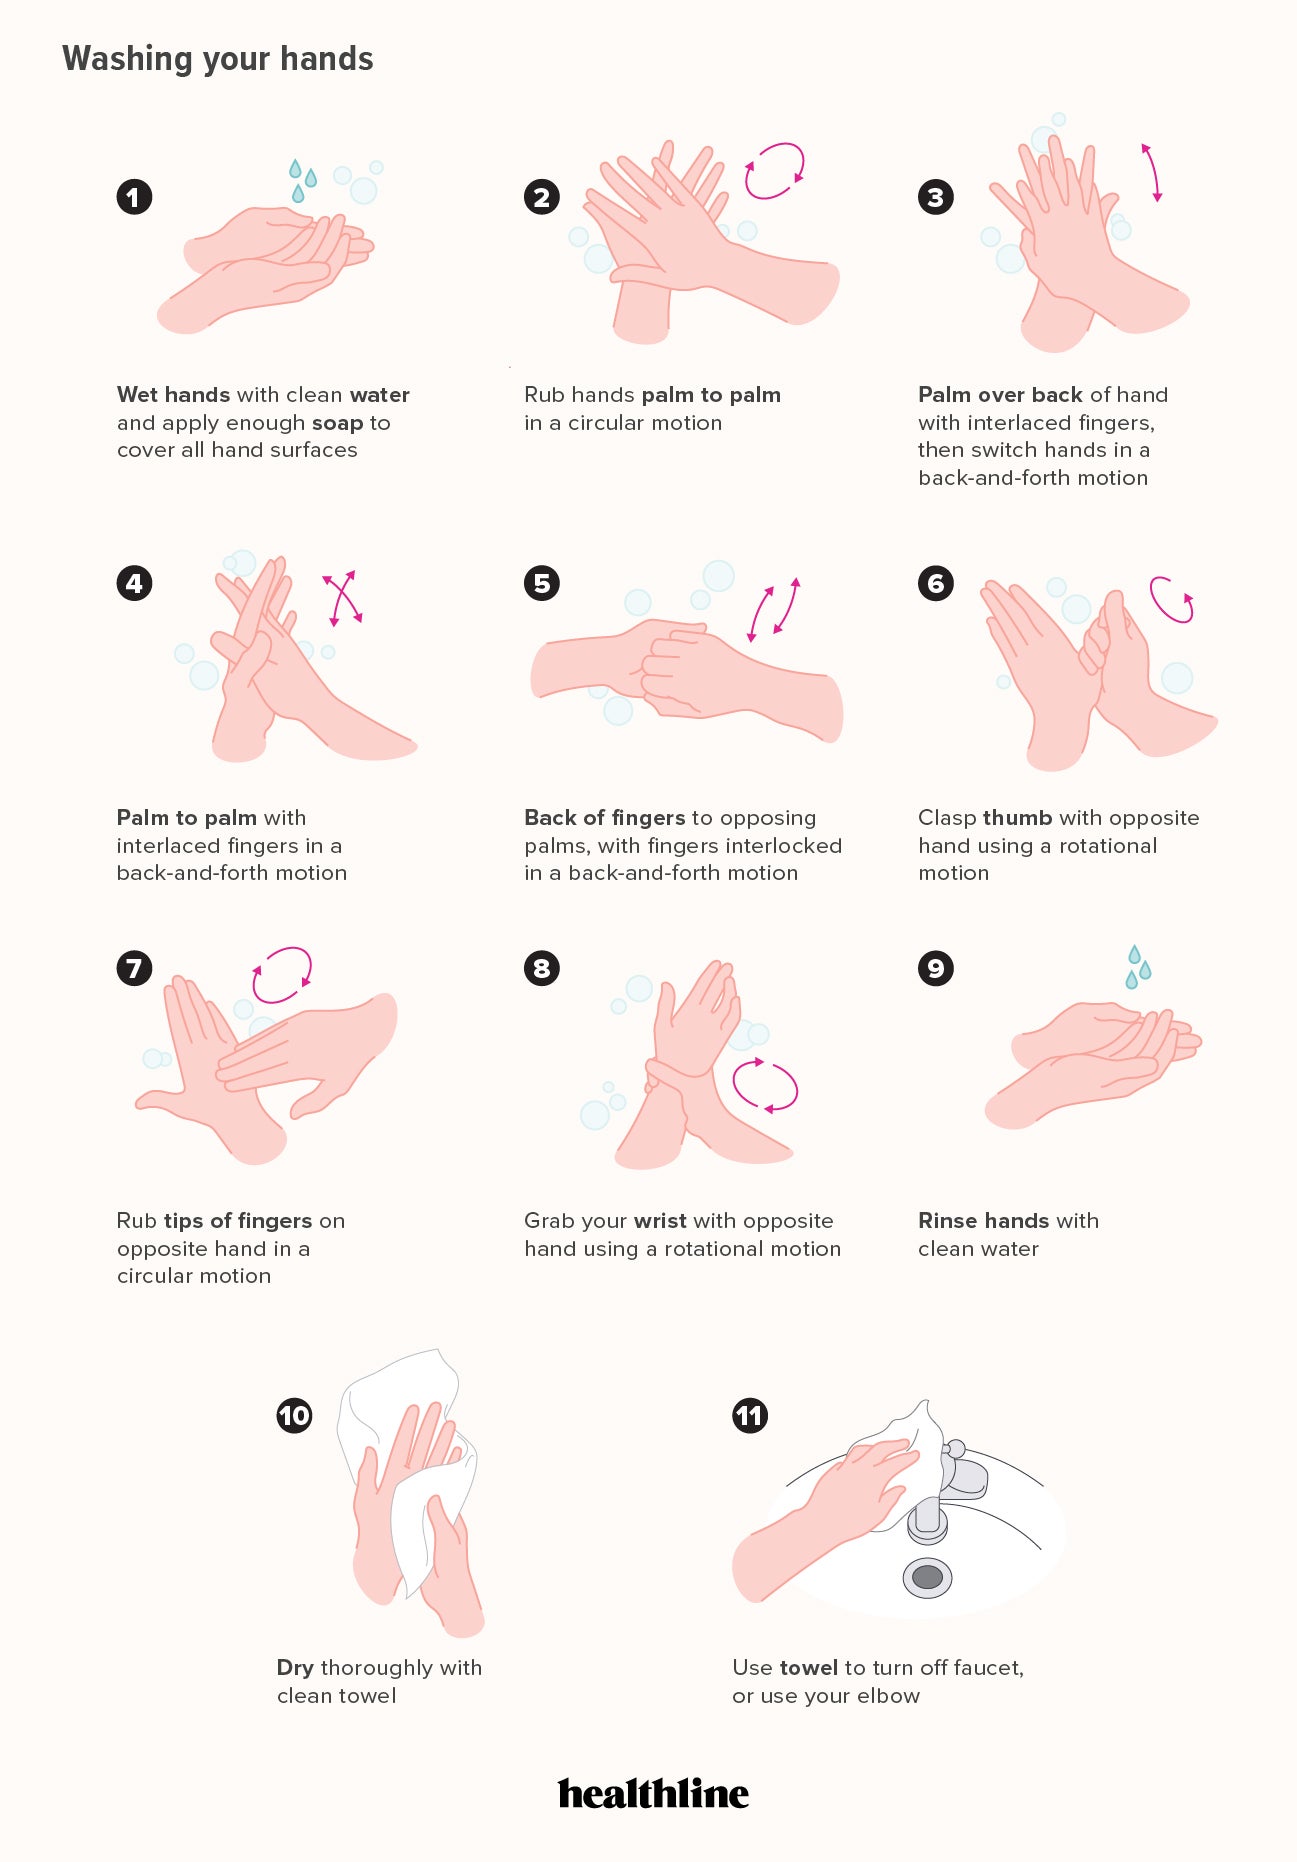 How Long Should You Wash Your Hands? Guidelines and Tips